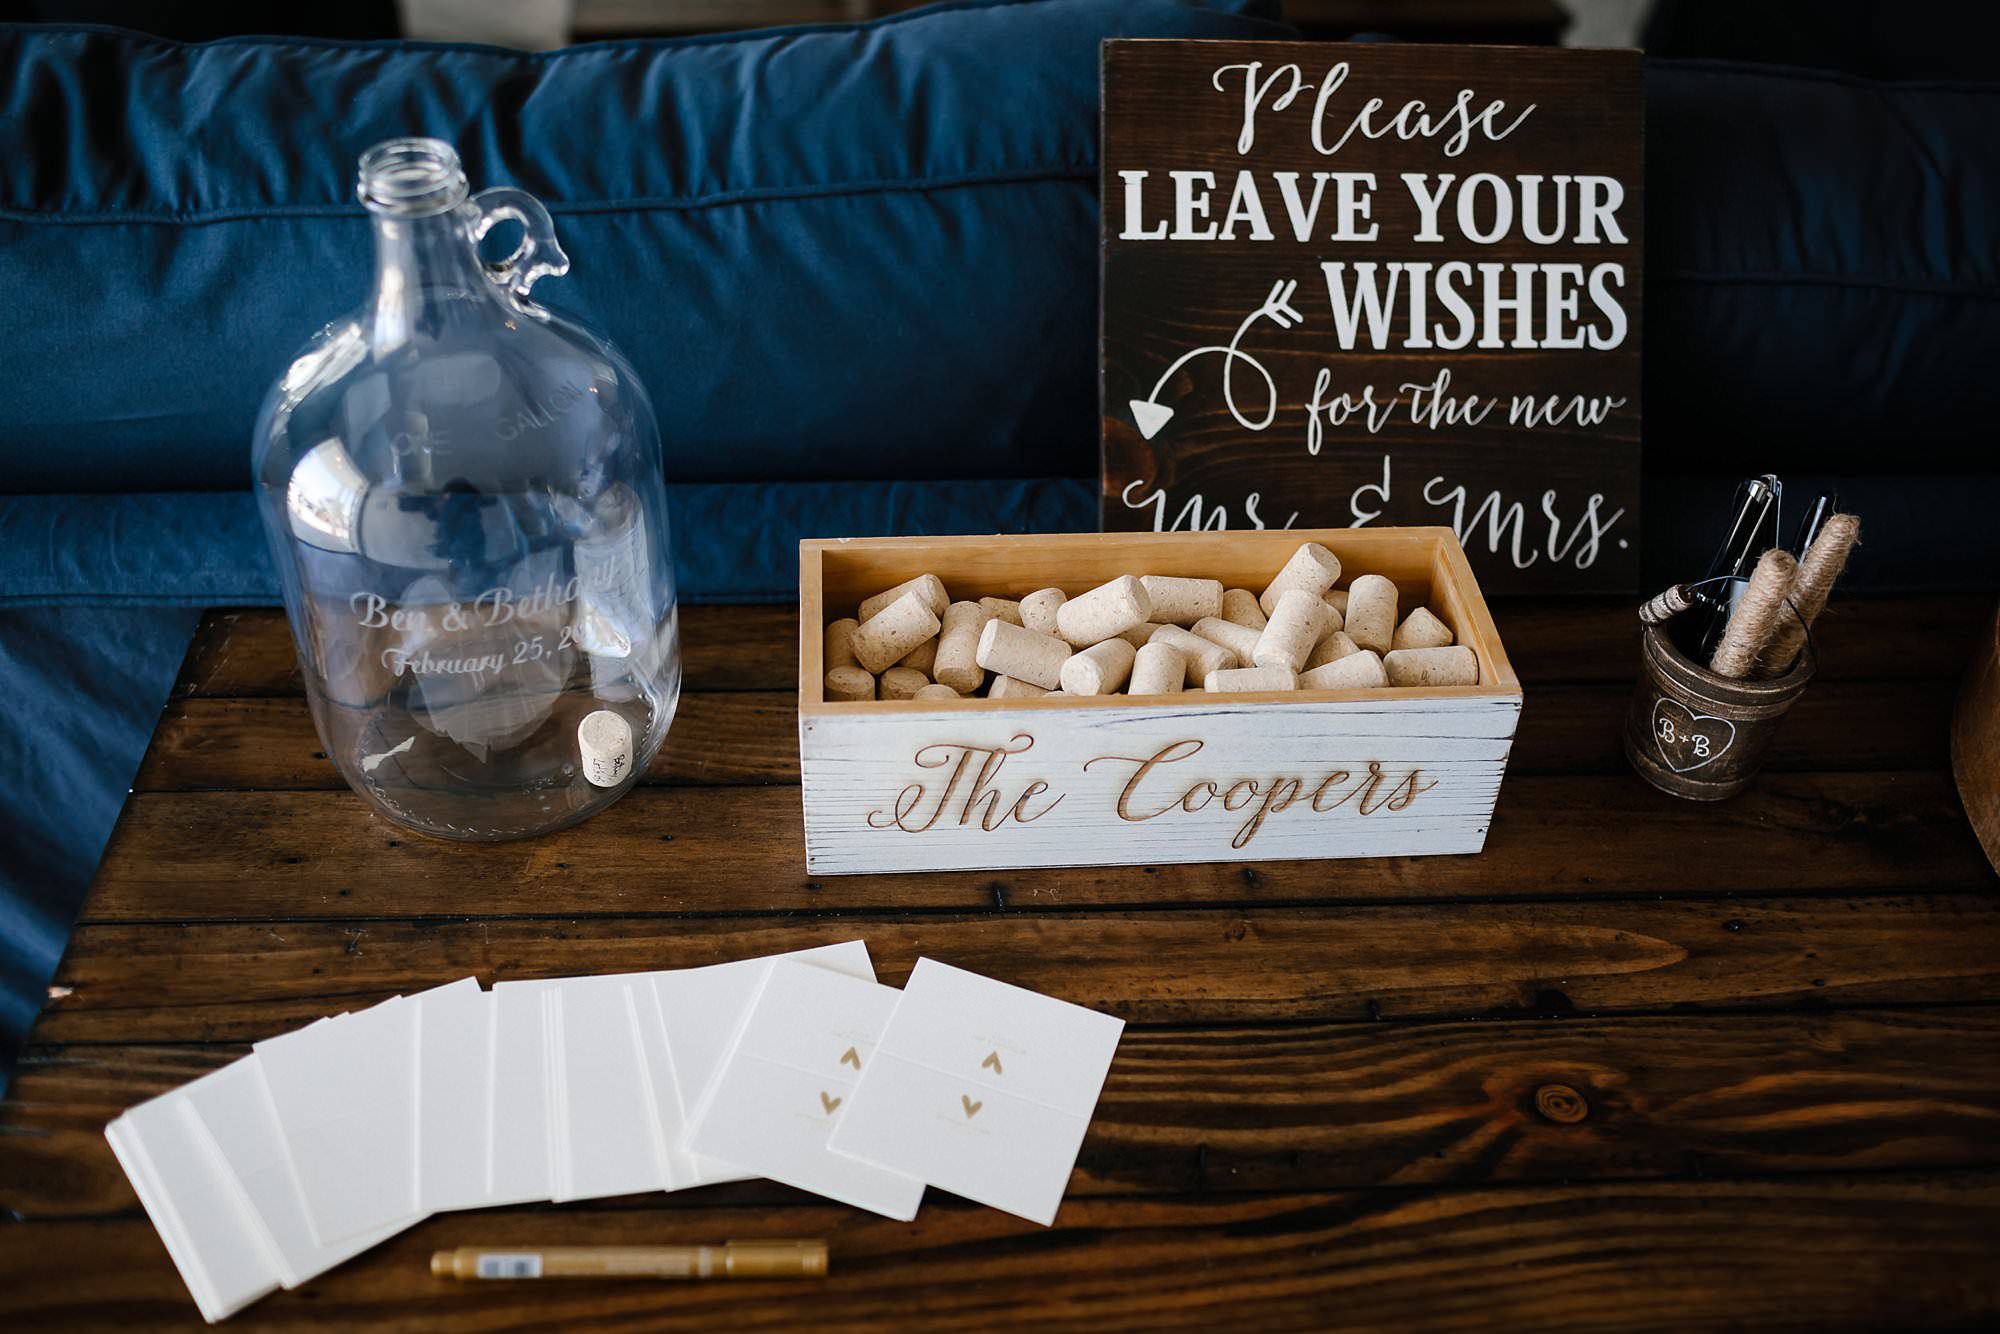 Unique wedding signage note cards and loose wine corks for guest to sign and place in glass bottle